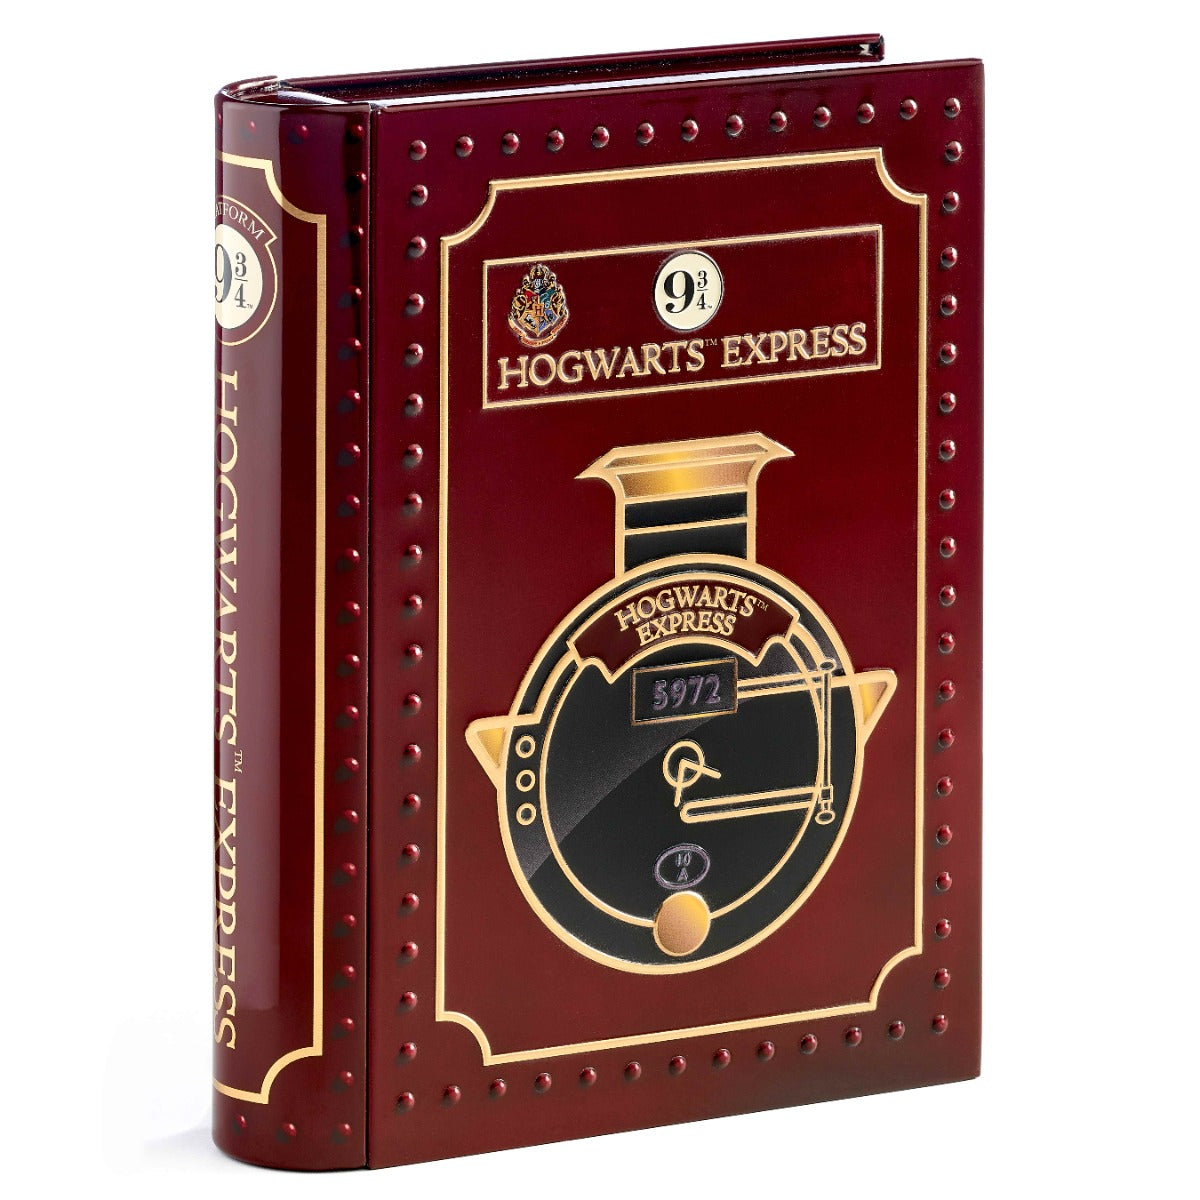 Harry Potter Hogwarts Express Official Licensed Tin Gift Set - Tracked Shipping